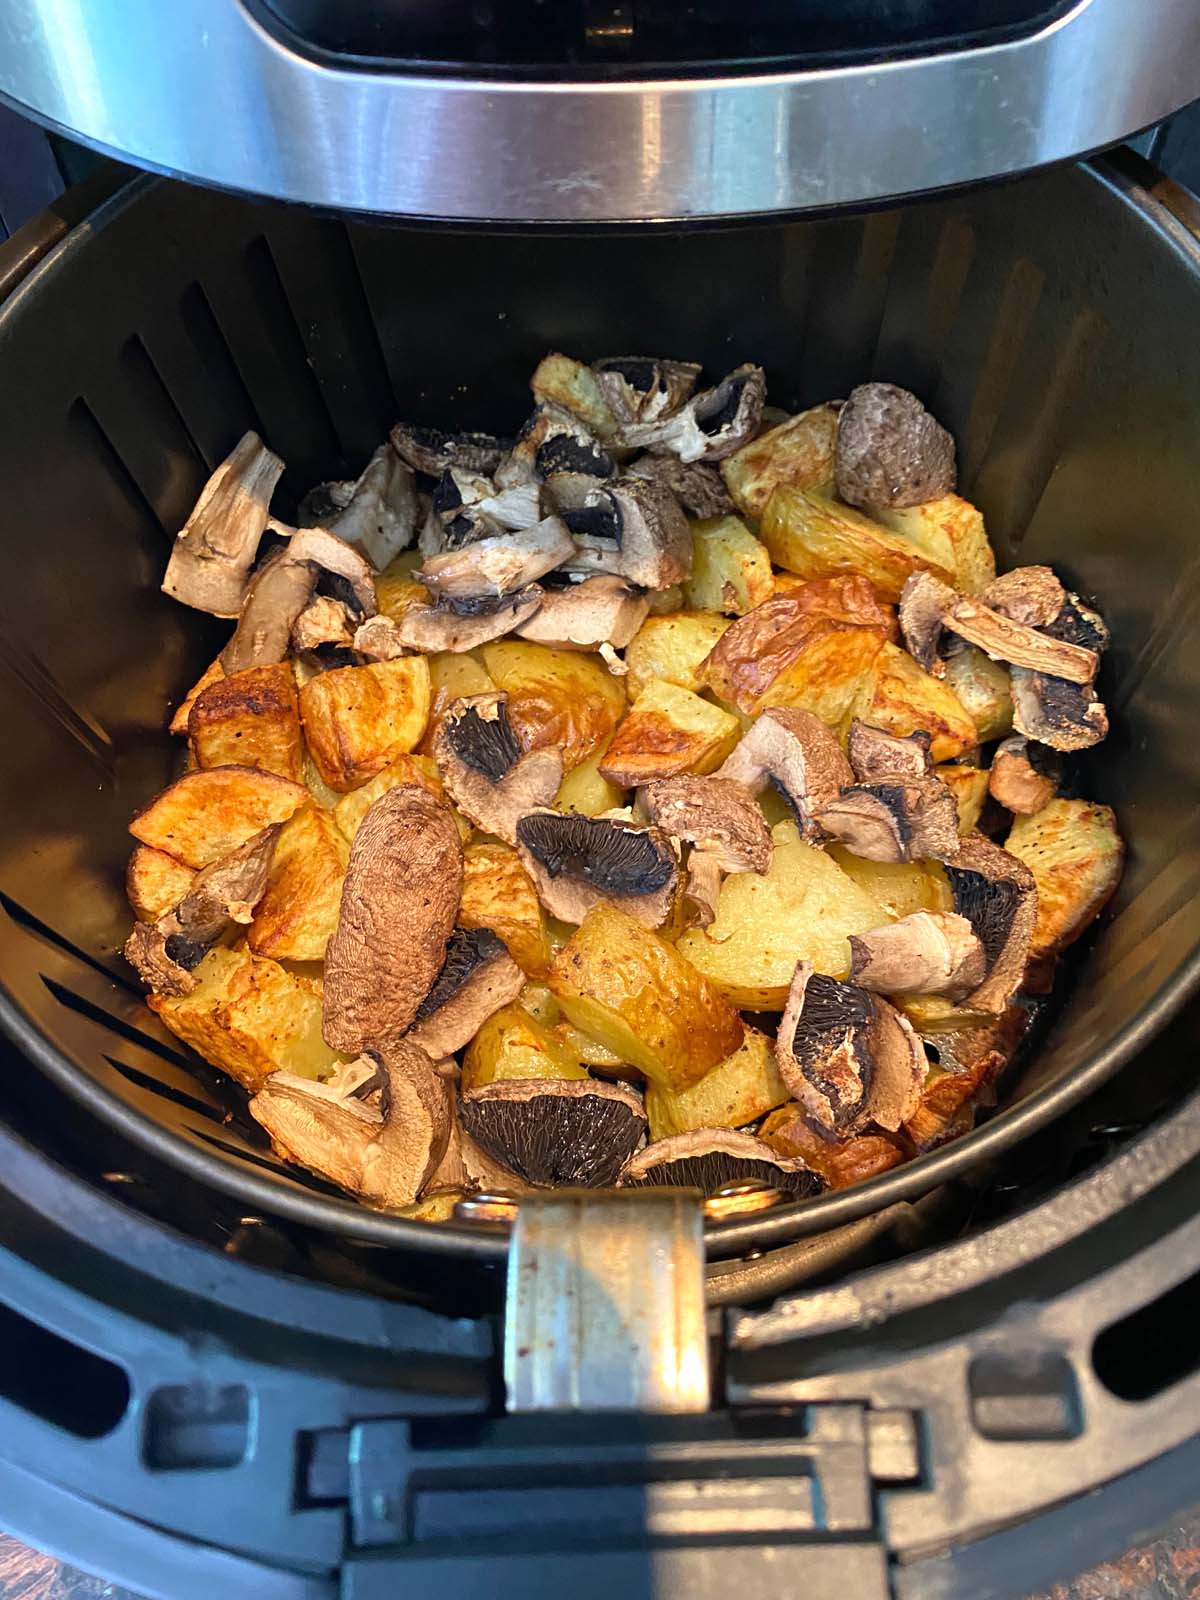 Cooked potatoes and mushrooms in an air fryer.